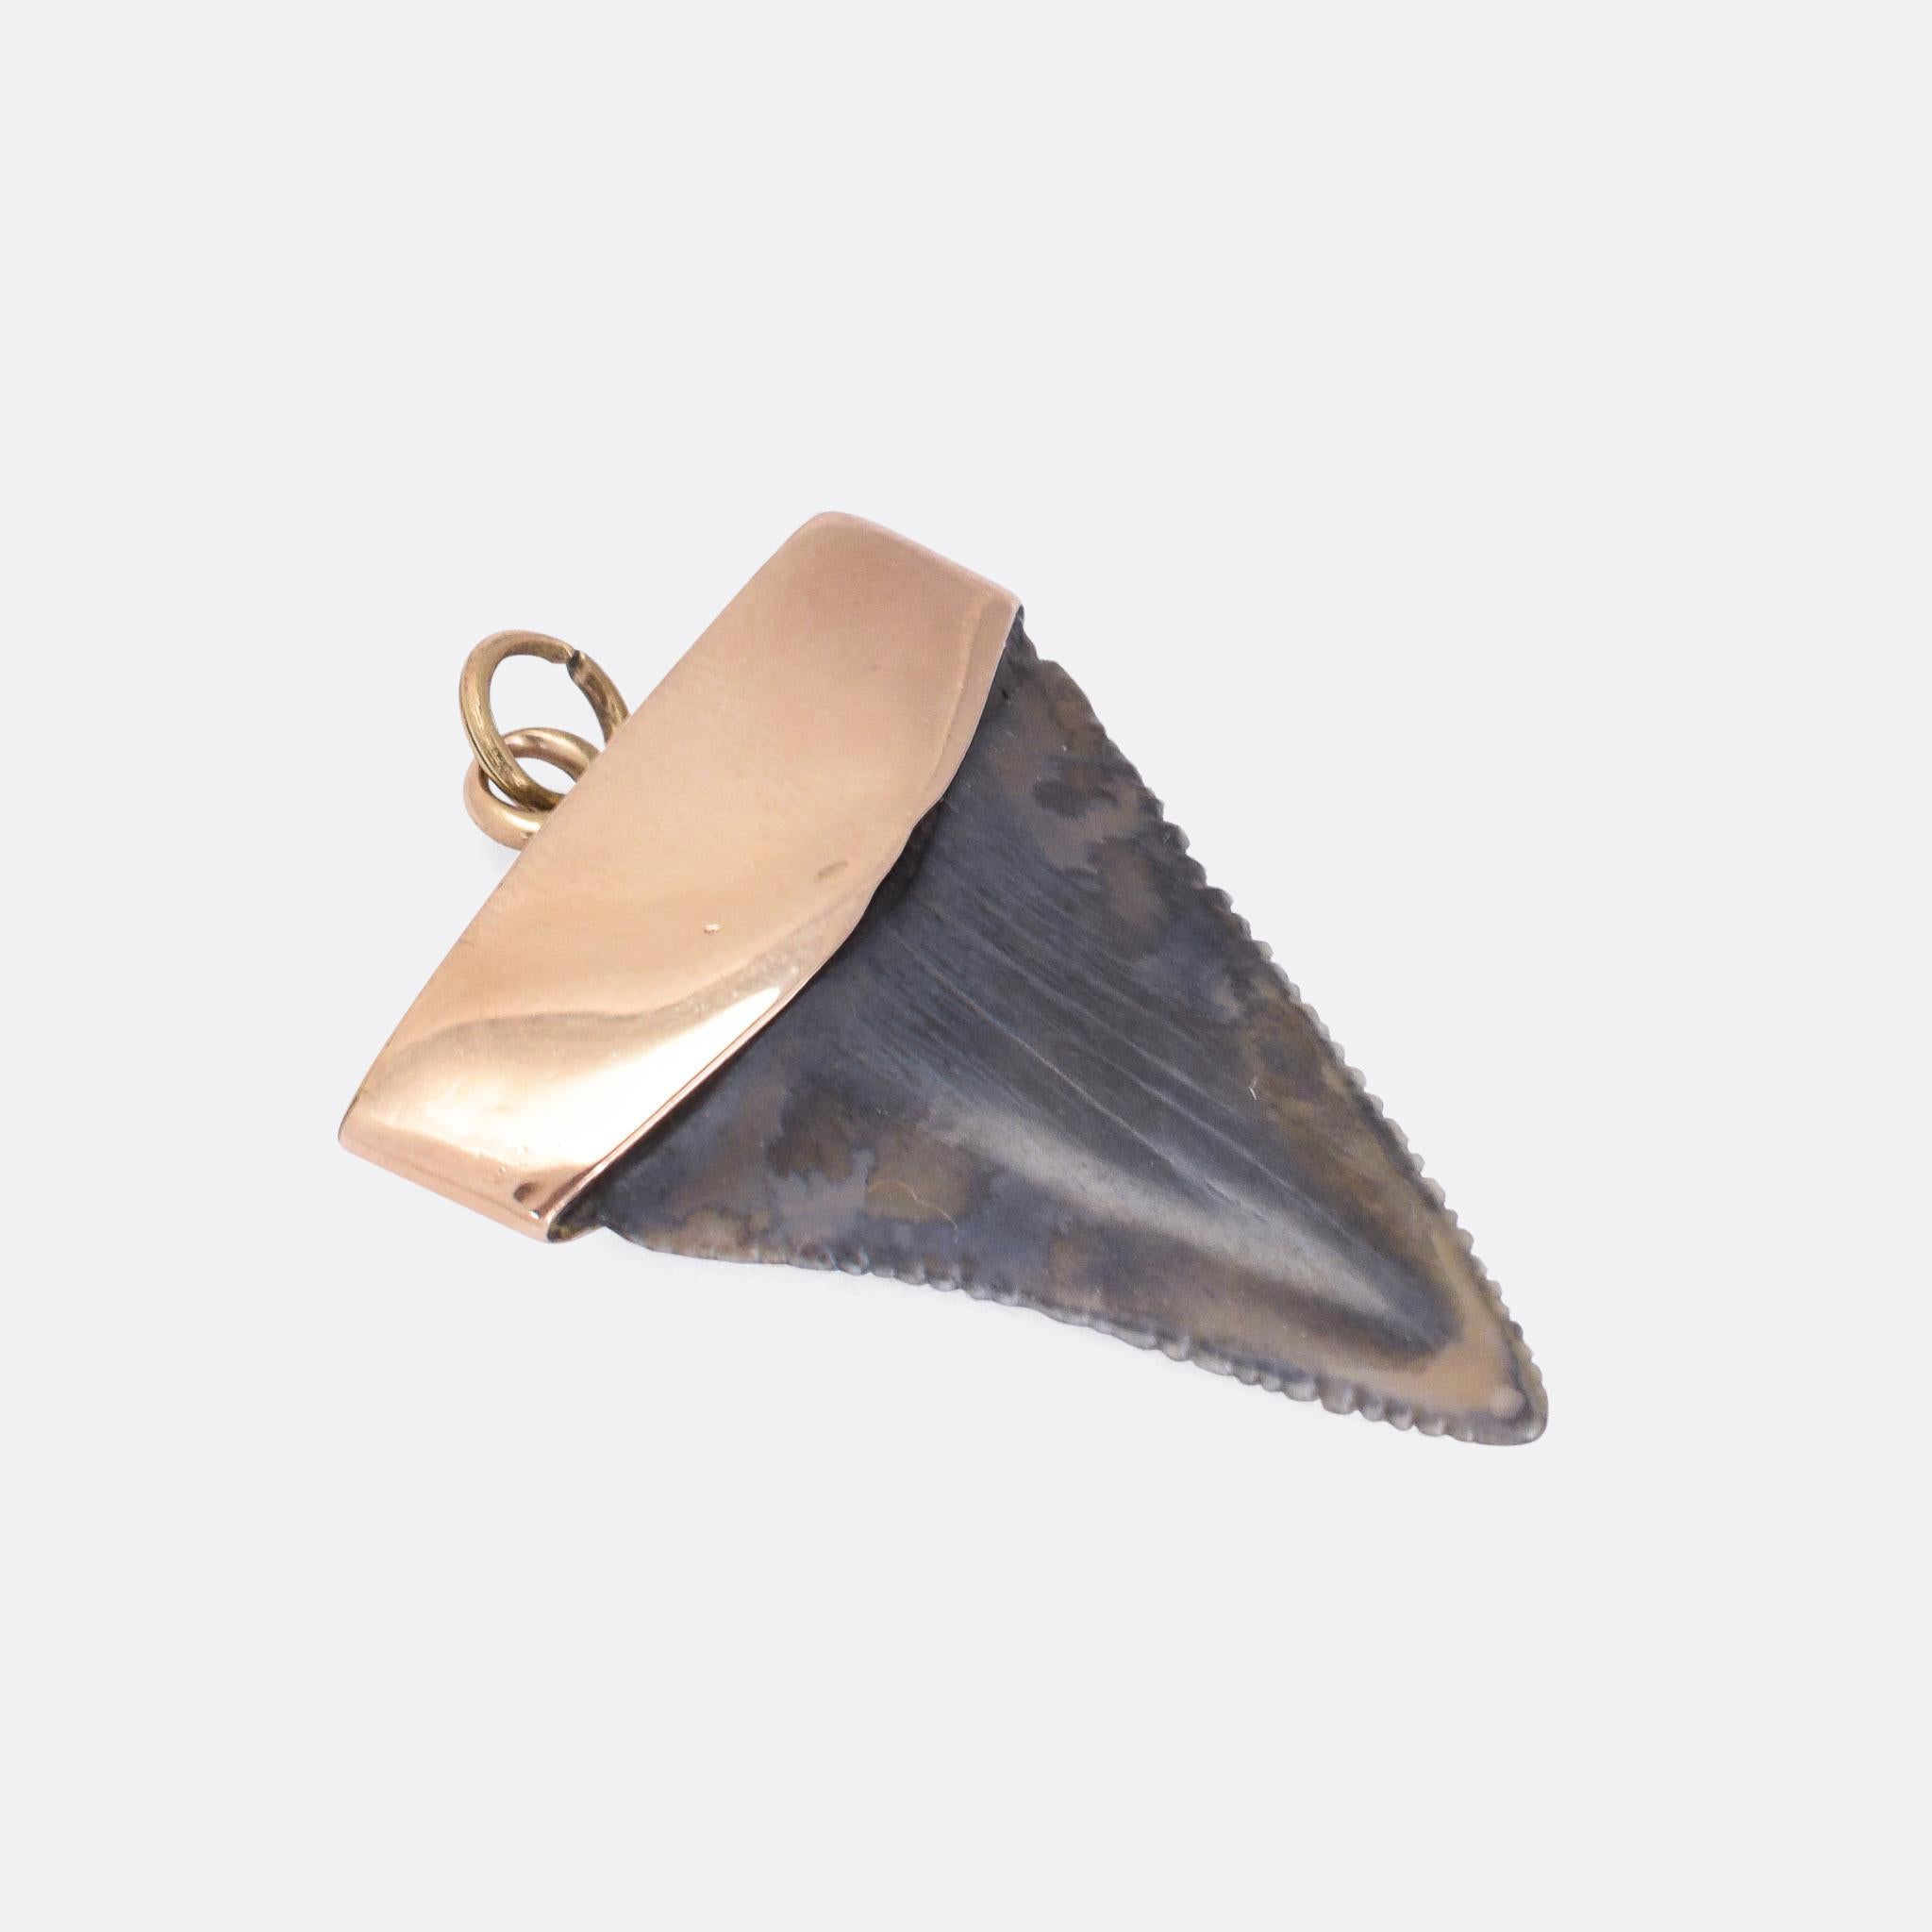 A cool Victorian shark tooth pendant dating from the late 19th Century. The tooth is mounted in 9 karat gold, and displays dark grey colouration throughout. It's a good size at 3.6cm in length; larger than they often are.

STONES 
Shark